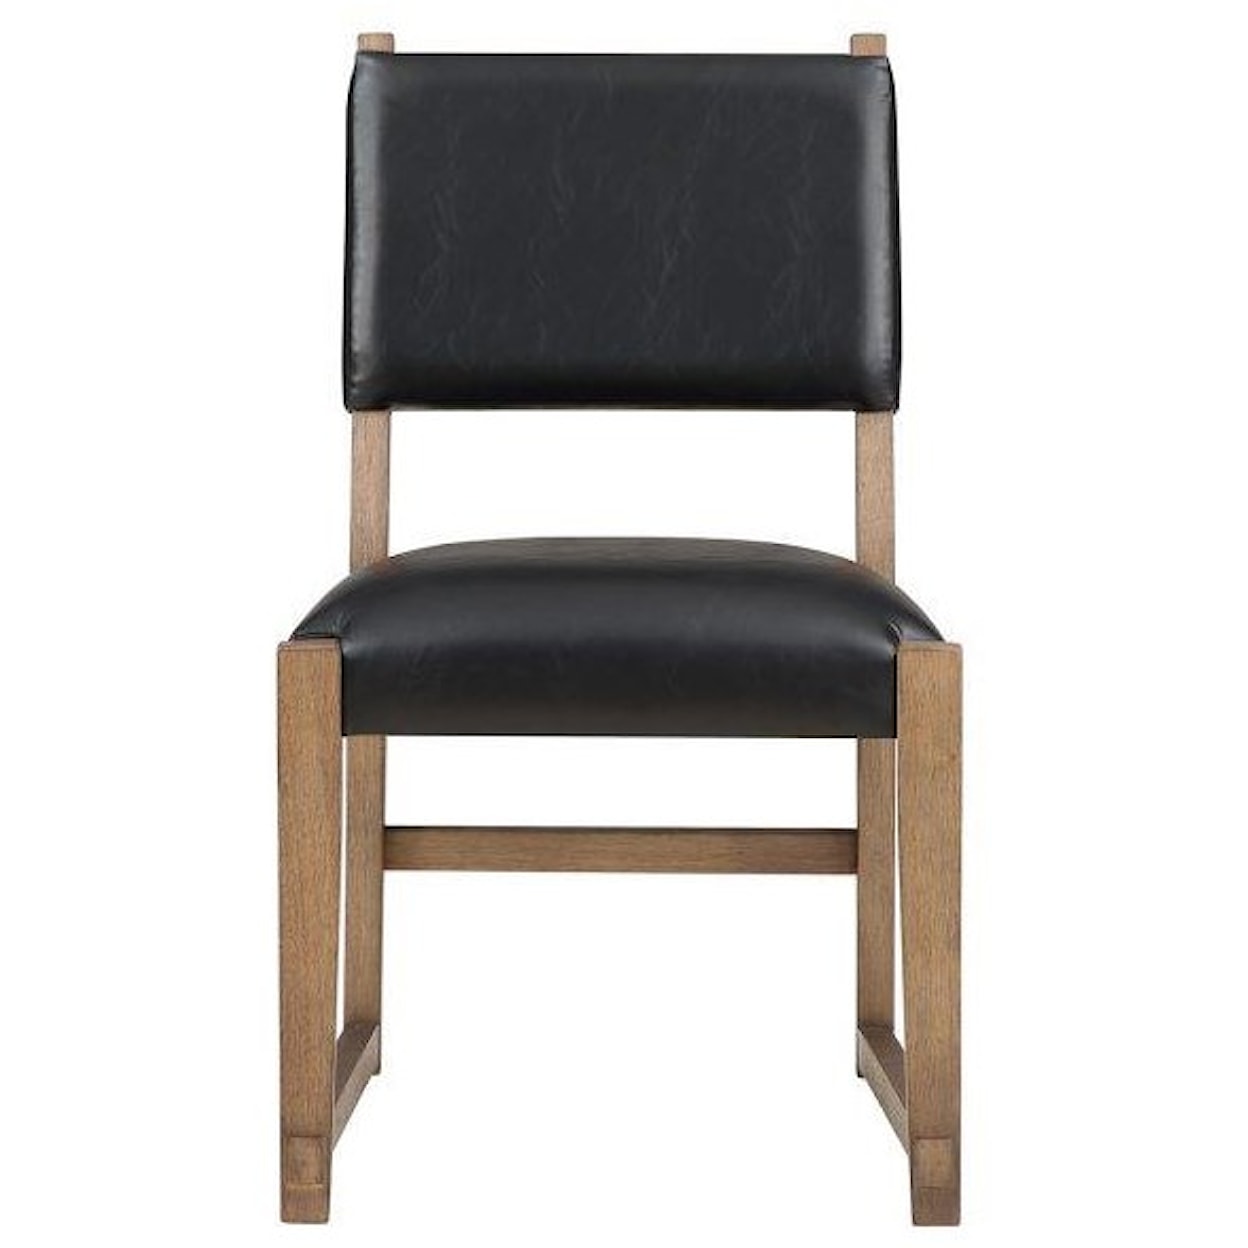 Steve Silver Atmore Atmore Side Chair